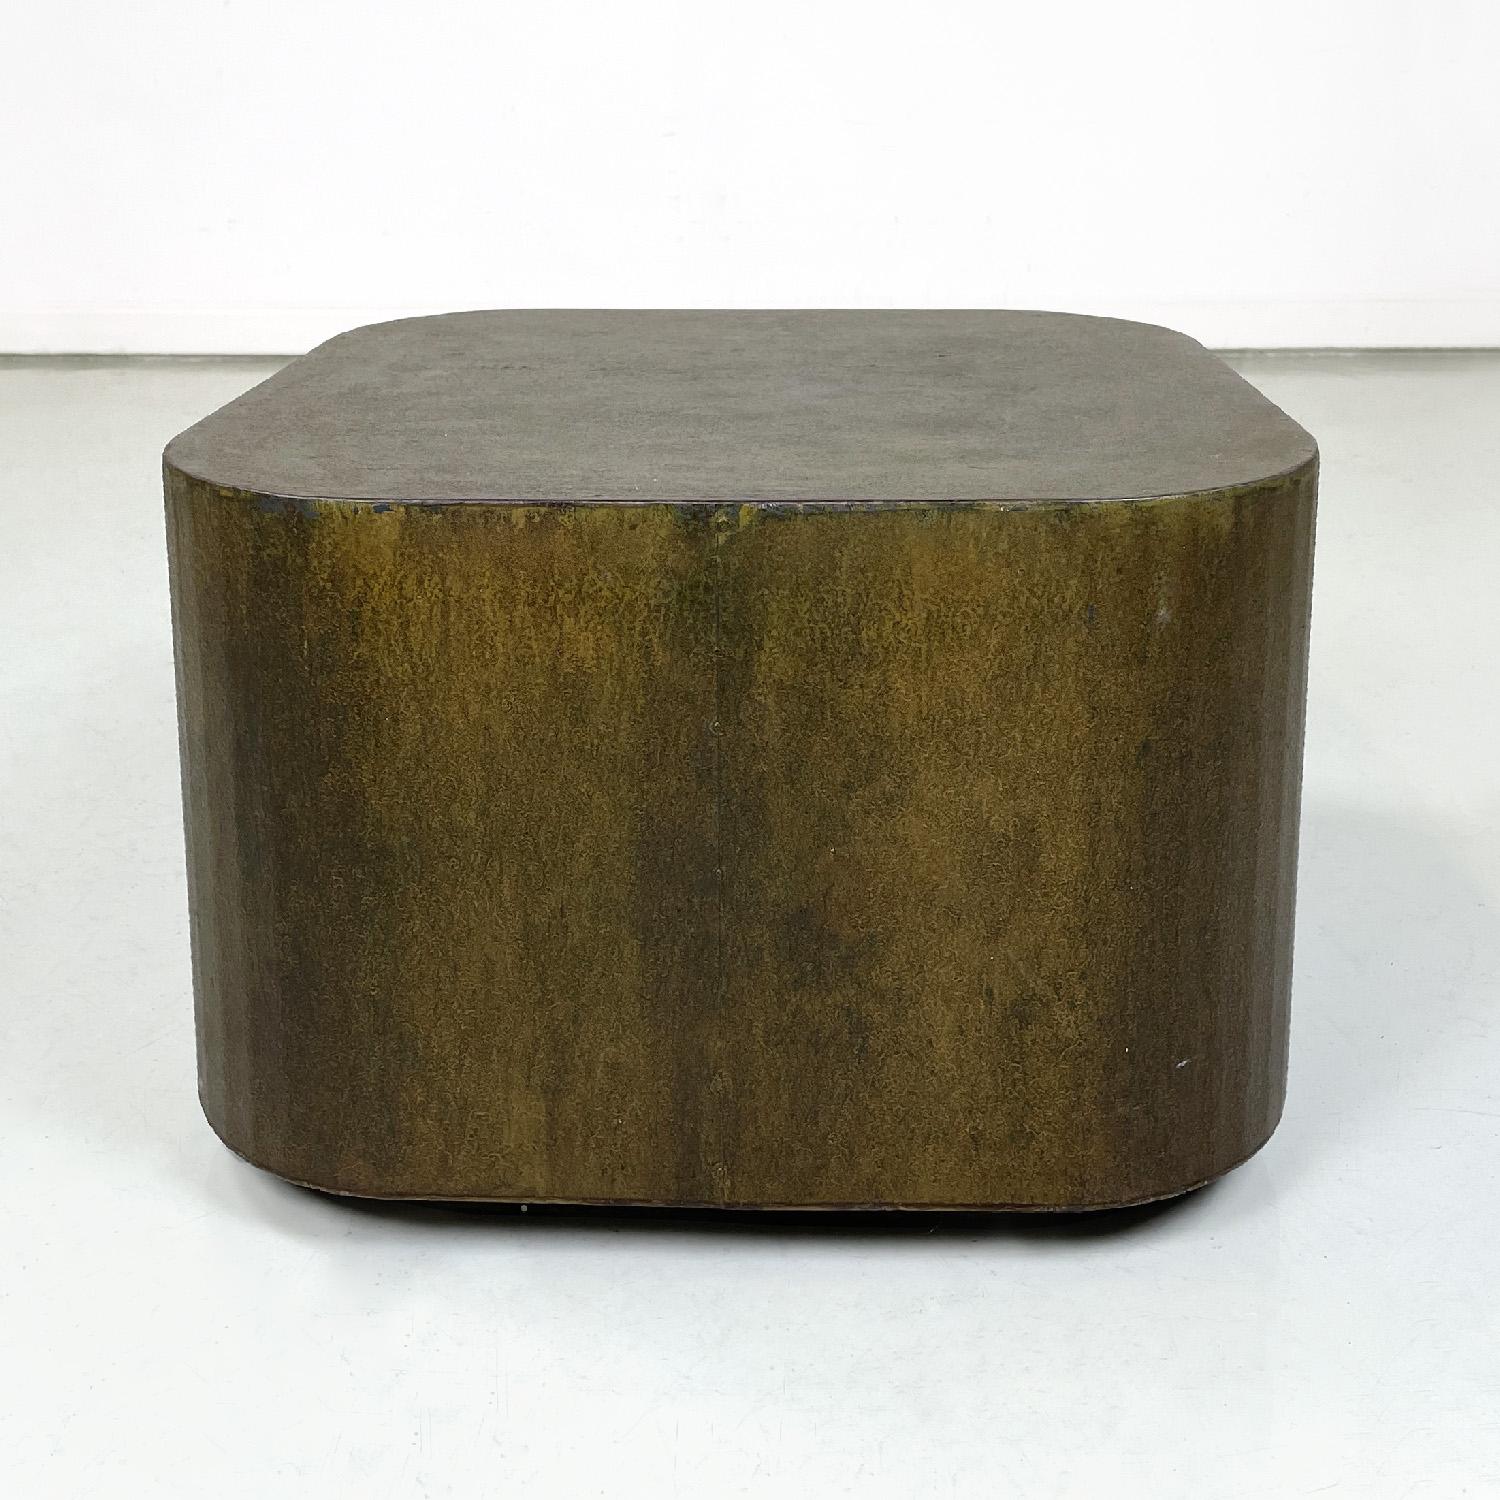 Italian post-modern squared coffee table or pedestal in Corten steel, 2000s
Corten steel coffee table or pedestal with square base. The corners are rounded, it has a slightly smaller base than the main structure. Can also be used in an outdoor